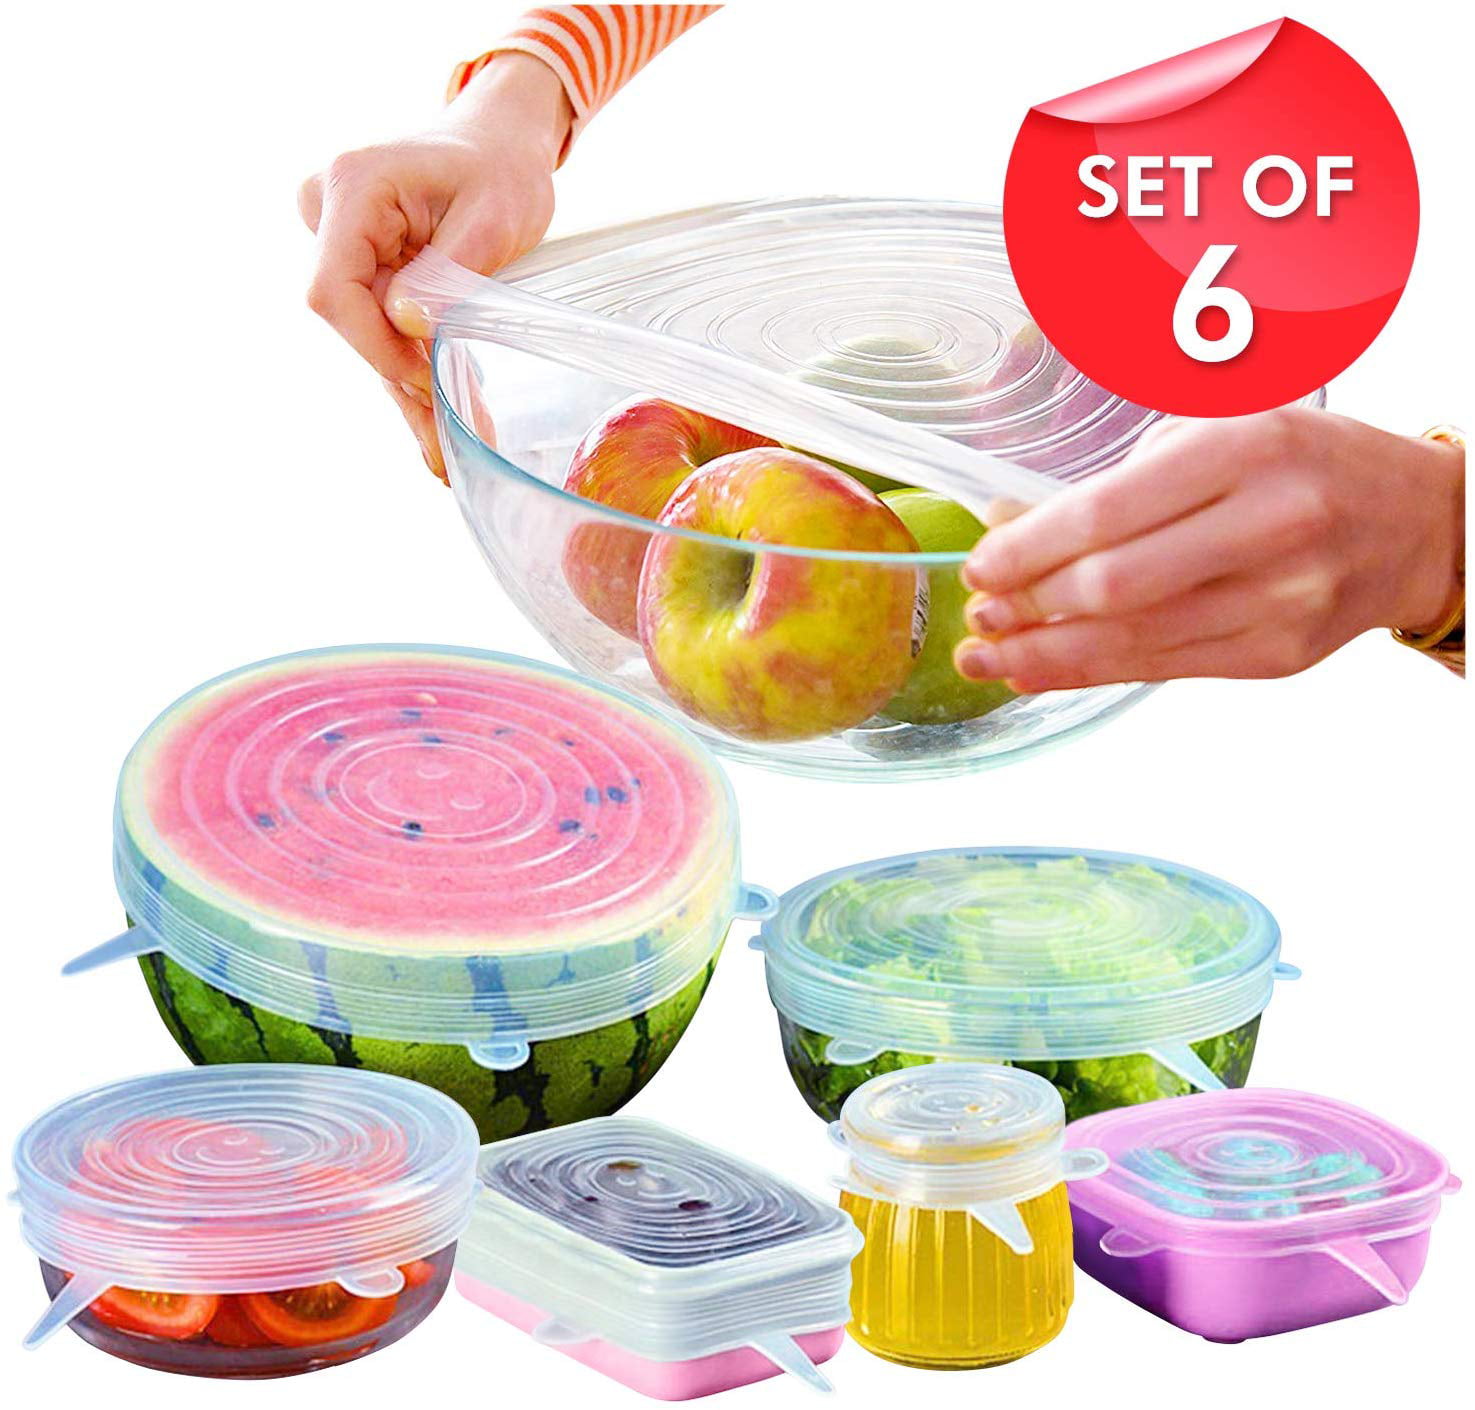 pots vegetables & fruit blue. pans For cans Set of 8 Nefas stretch silicone airtight lid Eco-friendly reusable alternative to cling film bowls